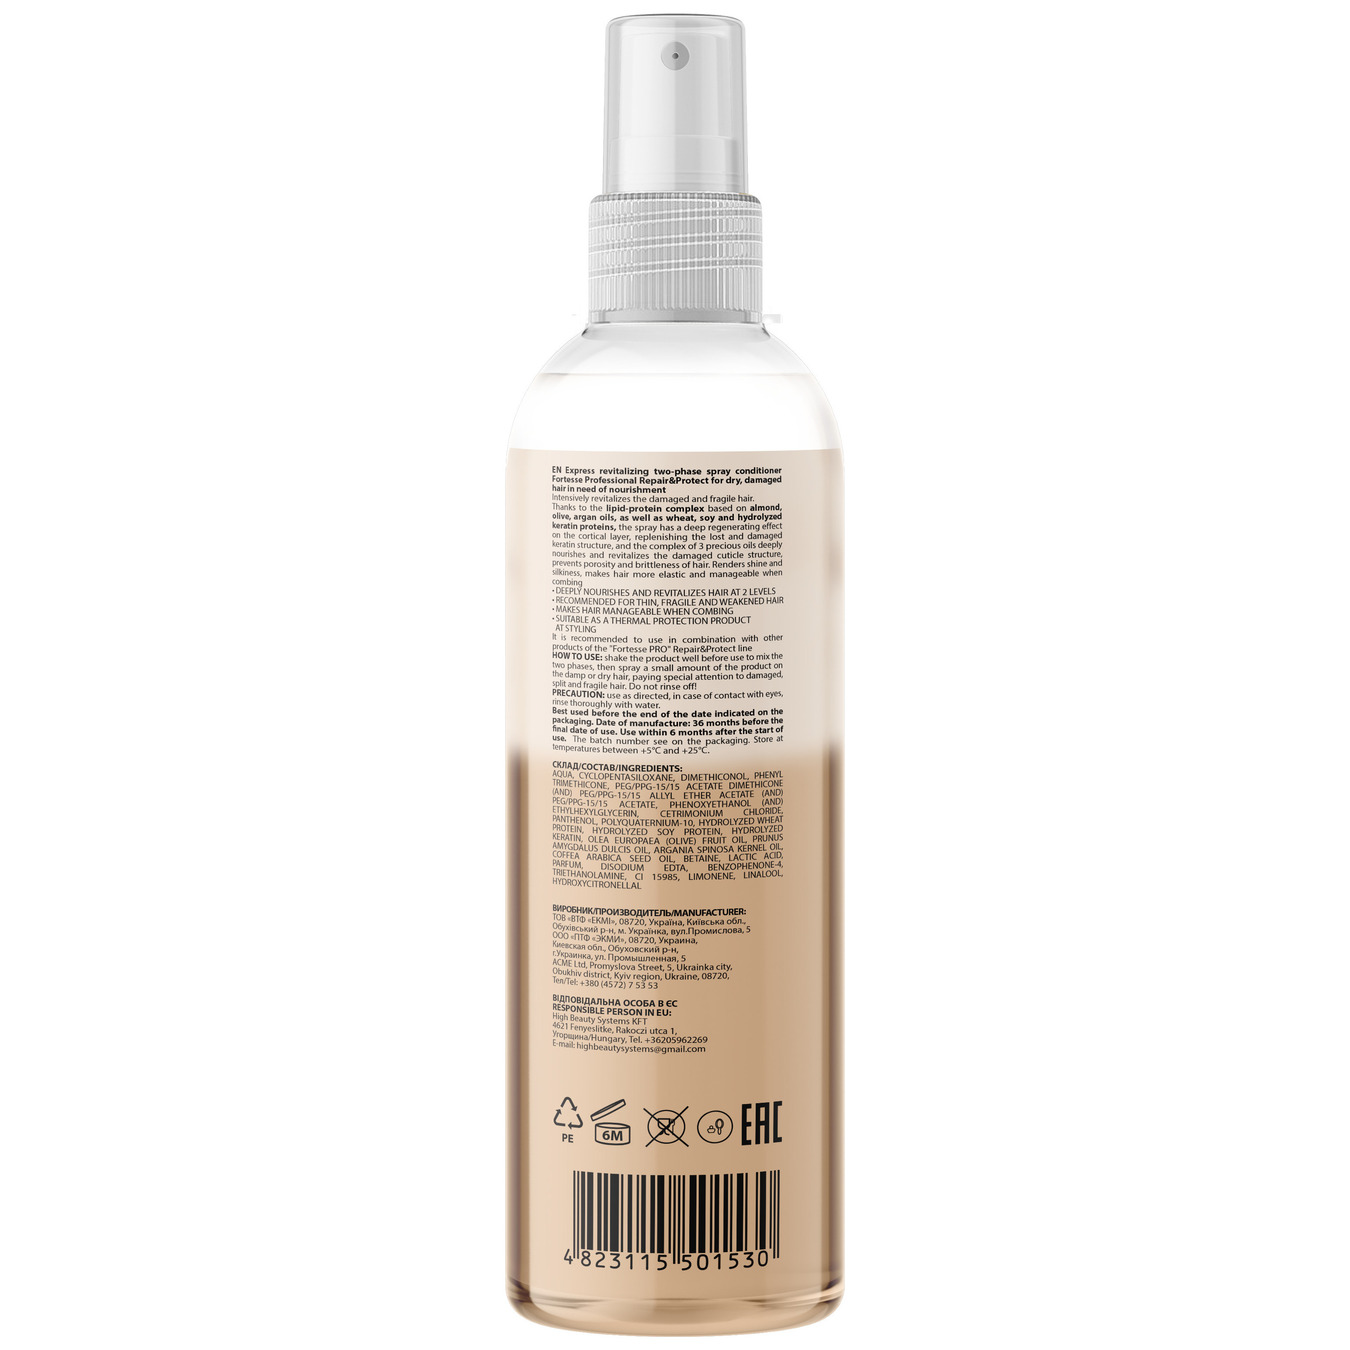 Spray-conditioner FORTESSE PRO repair&protect biphasic express restorative for dry damaged hair in need of nourishment 250 ml 2